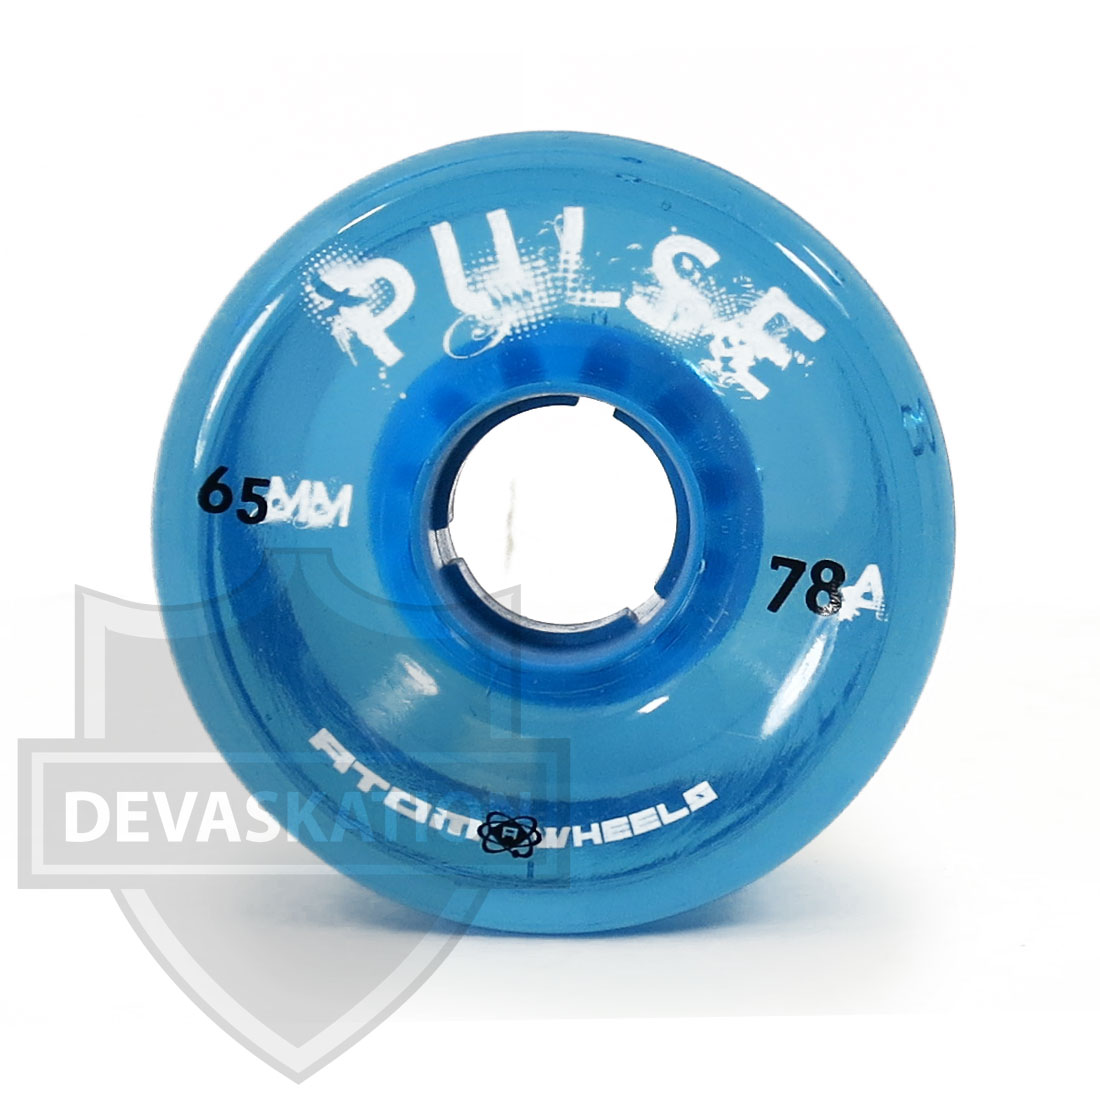 New Atom Pulse Wheels 4 Pack Roller Derby Roller Skating FREE SHIPPING 